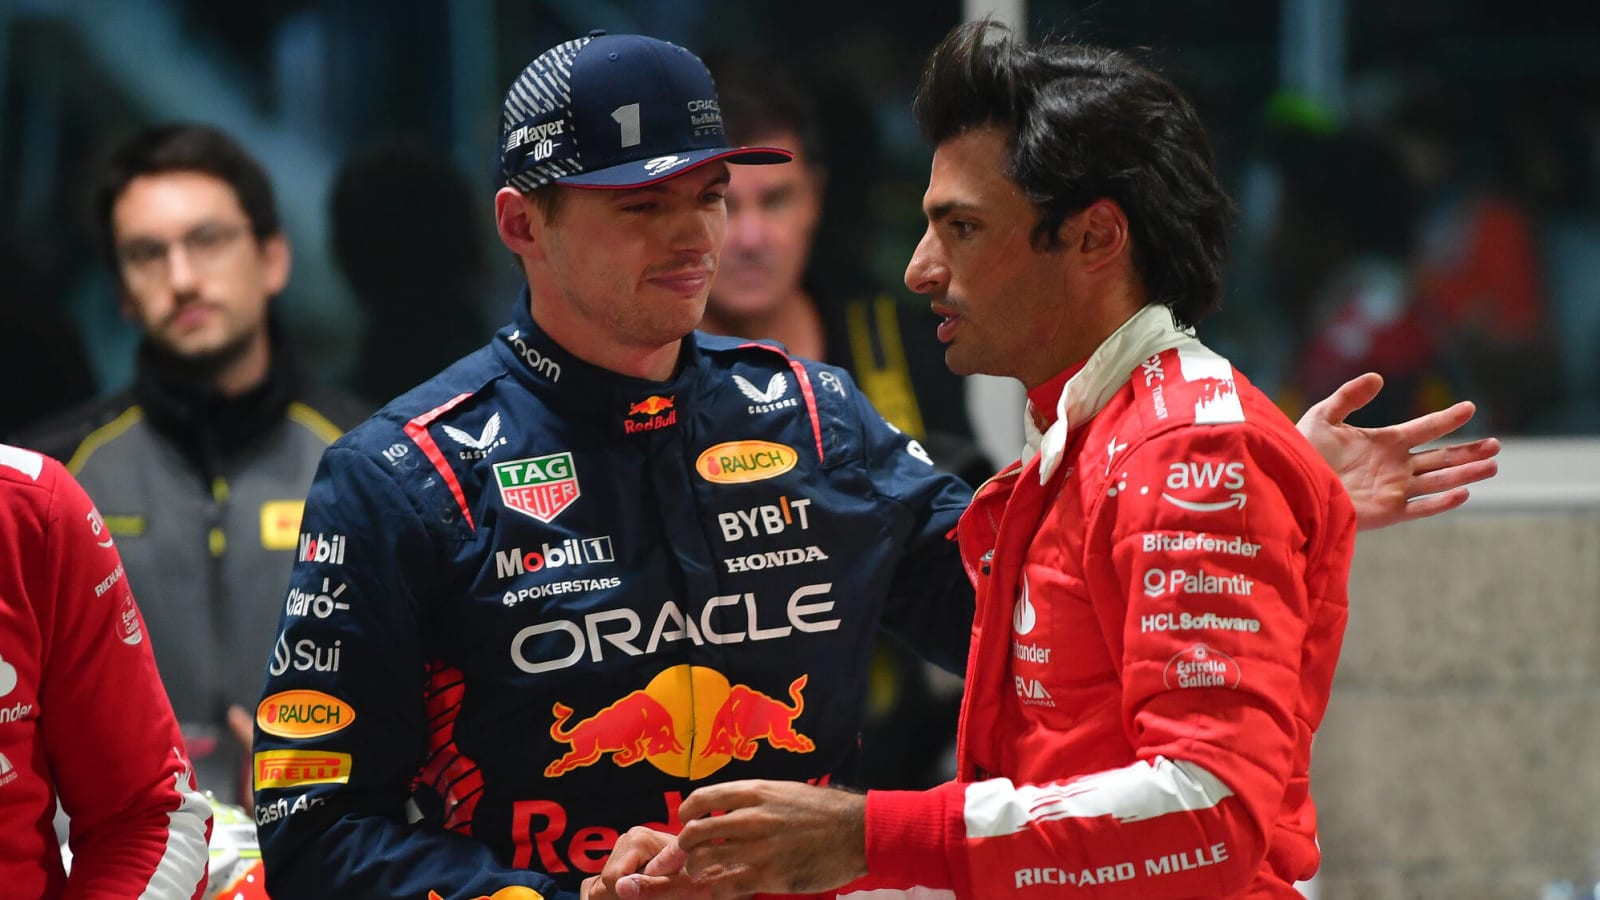 Carlos Sainz Jr. breaks down the timeline for making the final call on his new team after Ferrari’s exit